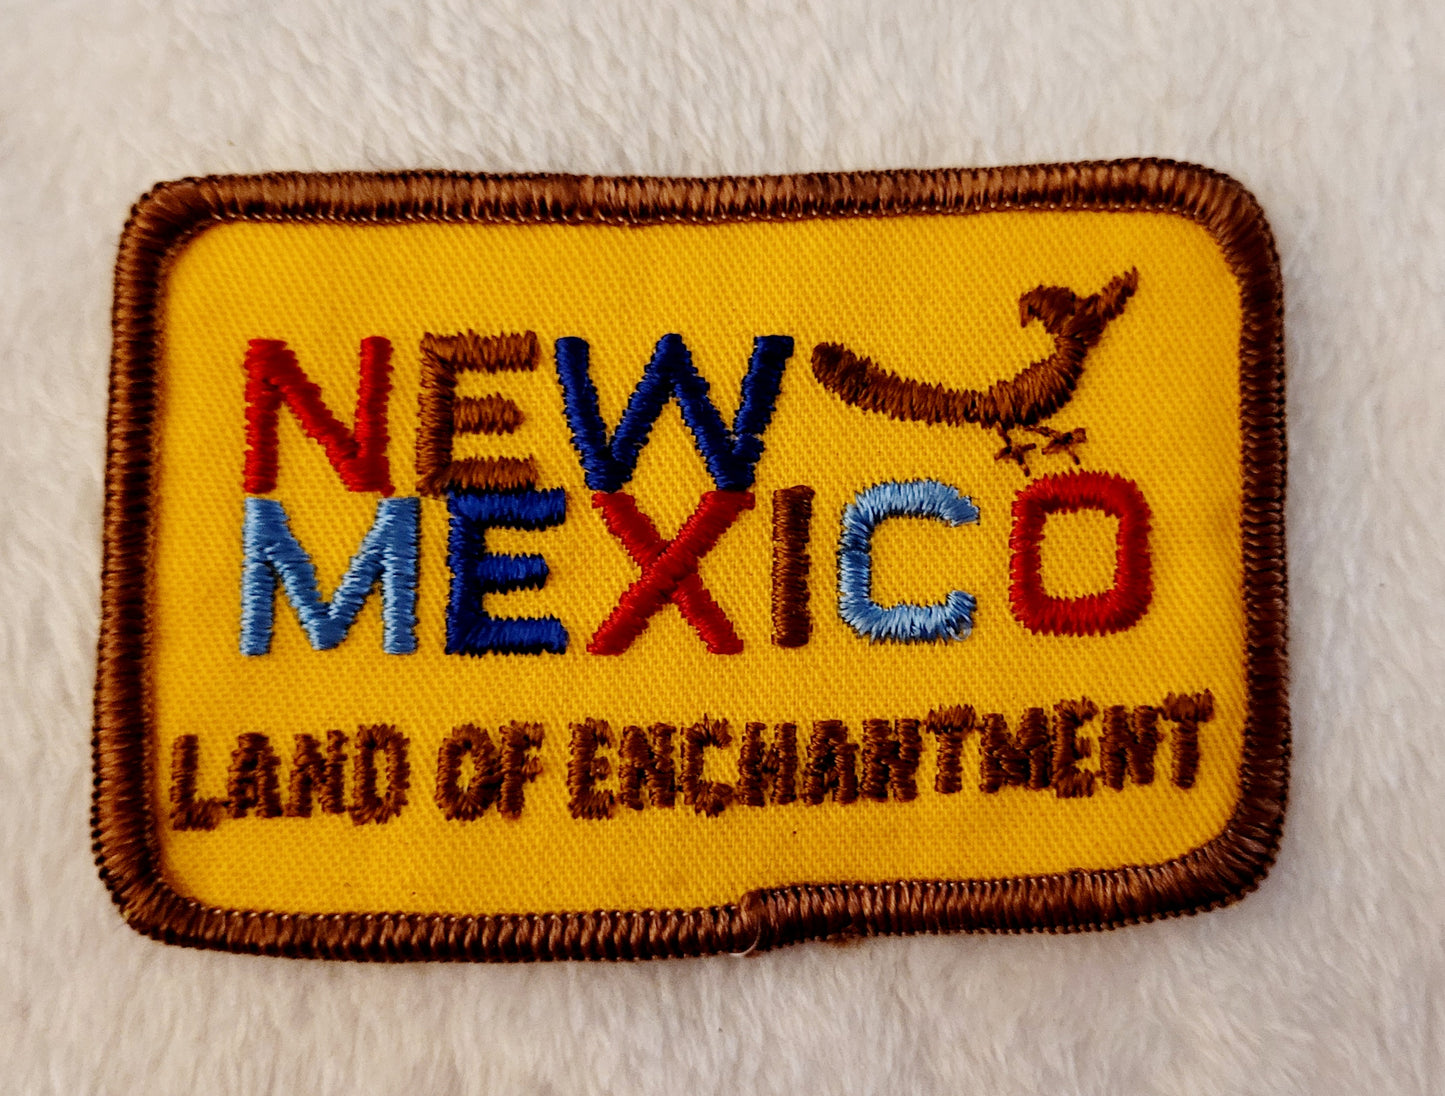 Vintage *New Mexico Land of Enchantment Patch